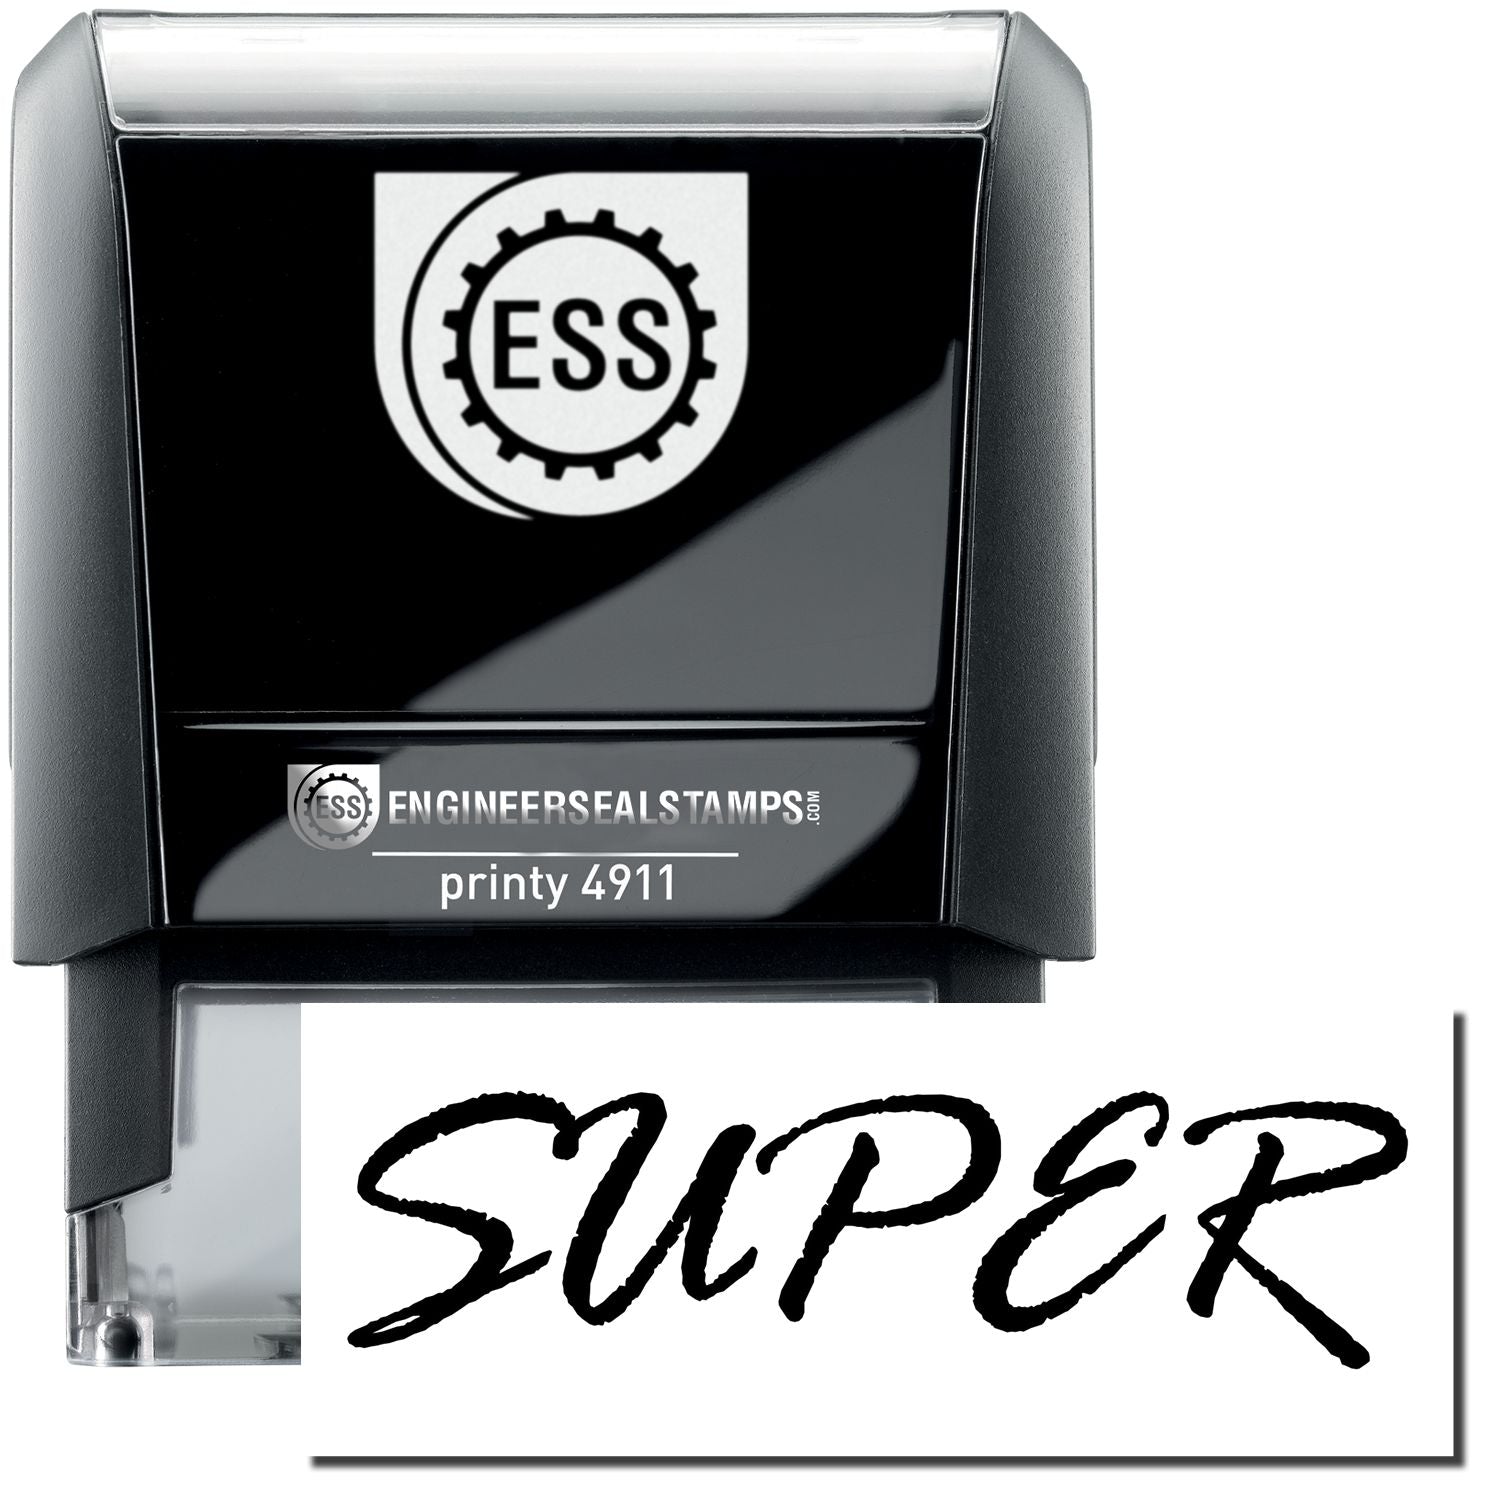 A self-inking stamp with a stamped image showing how the text "SUPER" is displayed after stamping.